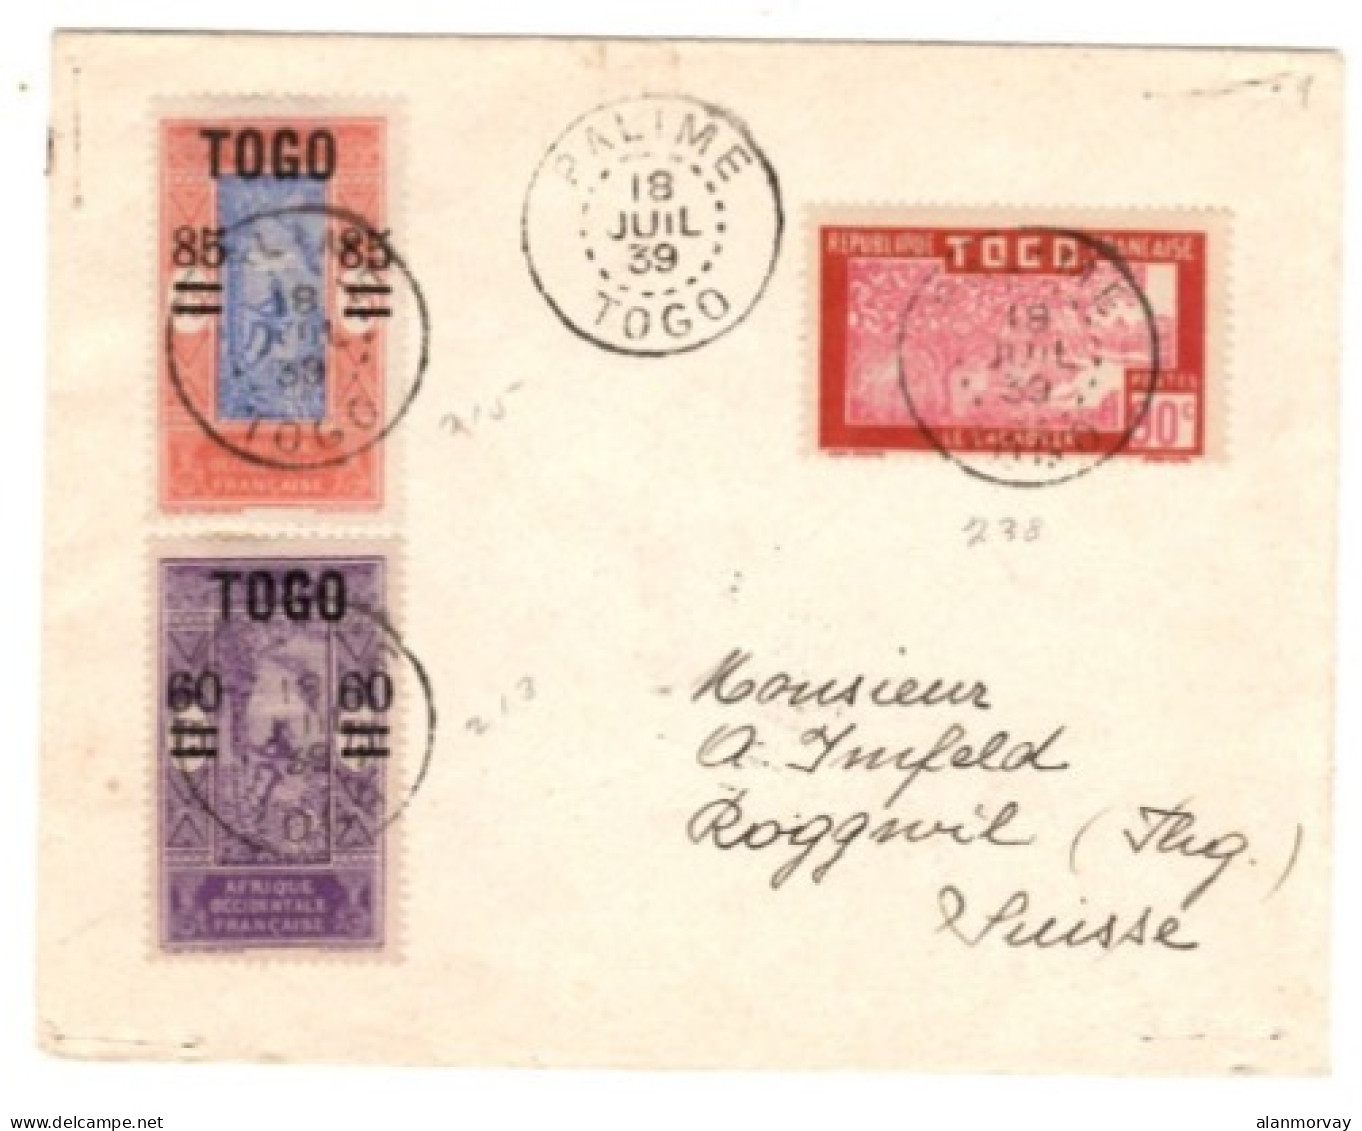 Togo - July 18, 1939 Palime Cover To Switzerland - Lettres & Documents